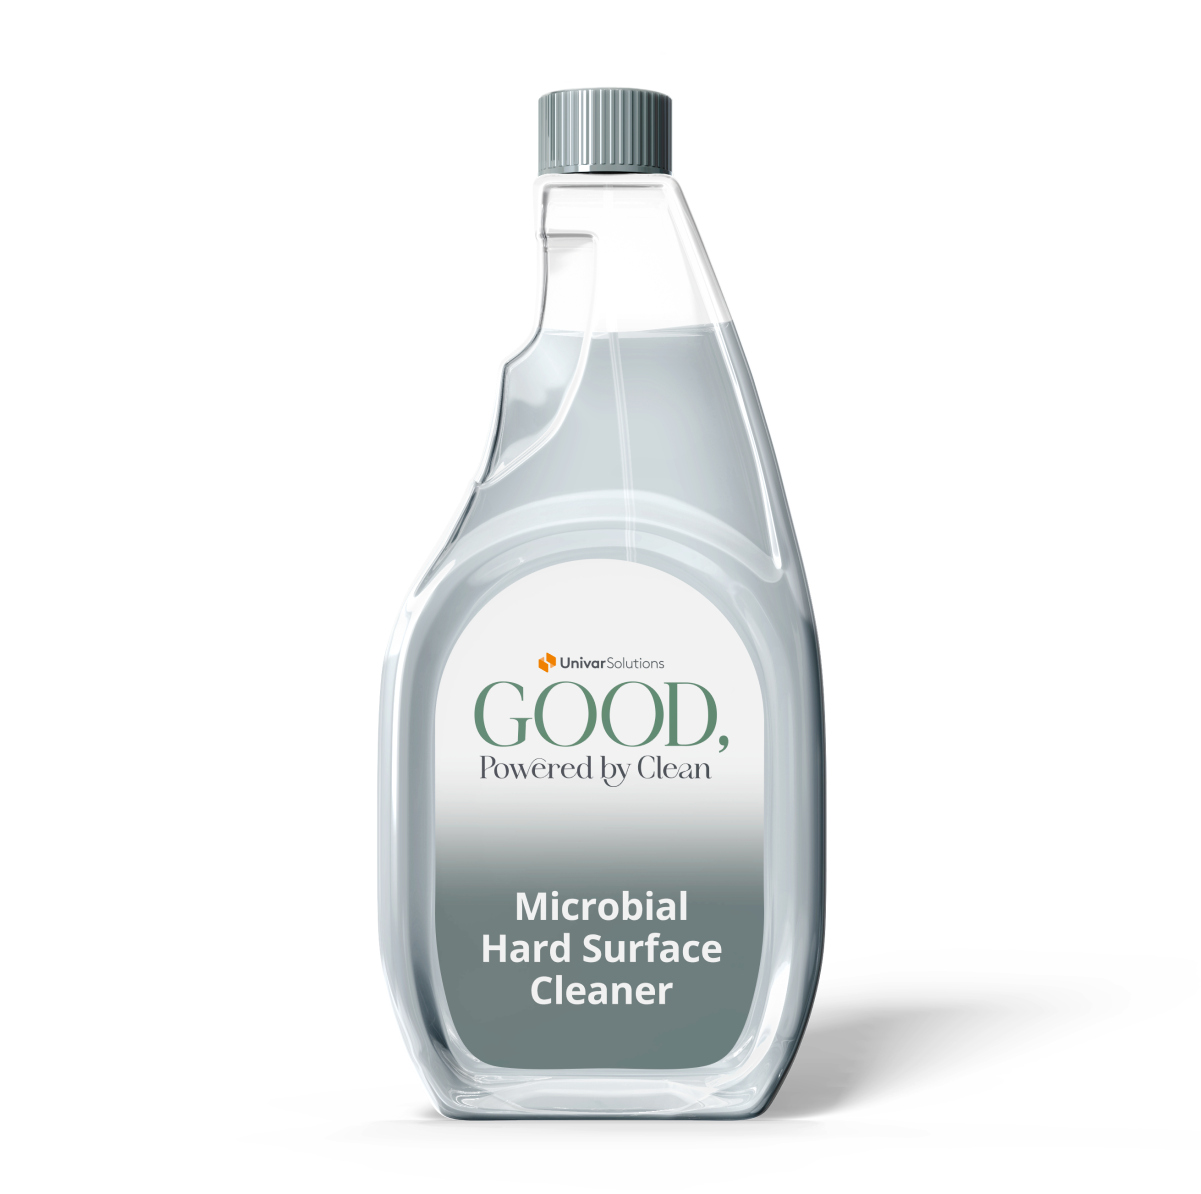 A bottle of Microbial Hard Surface Cleaner